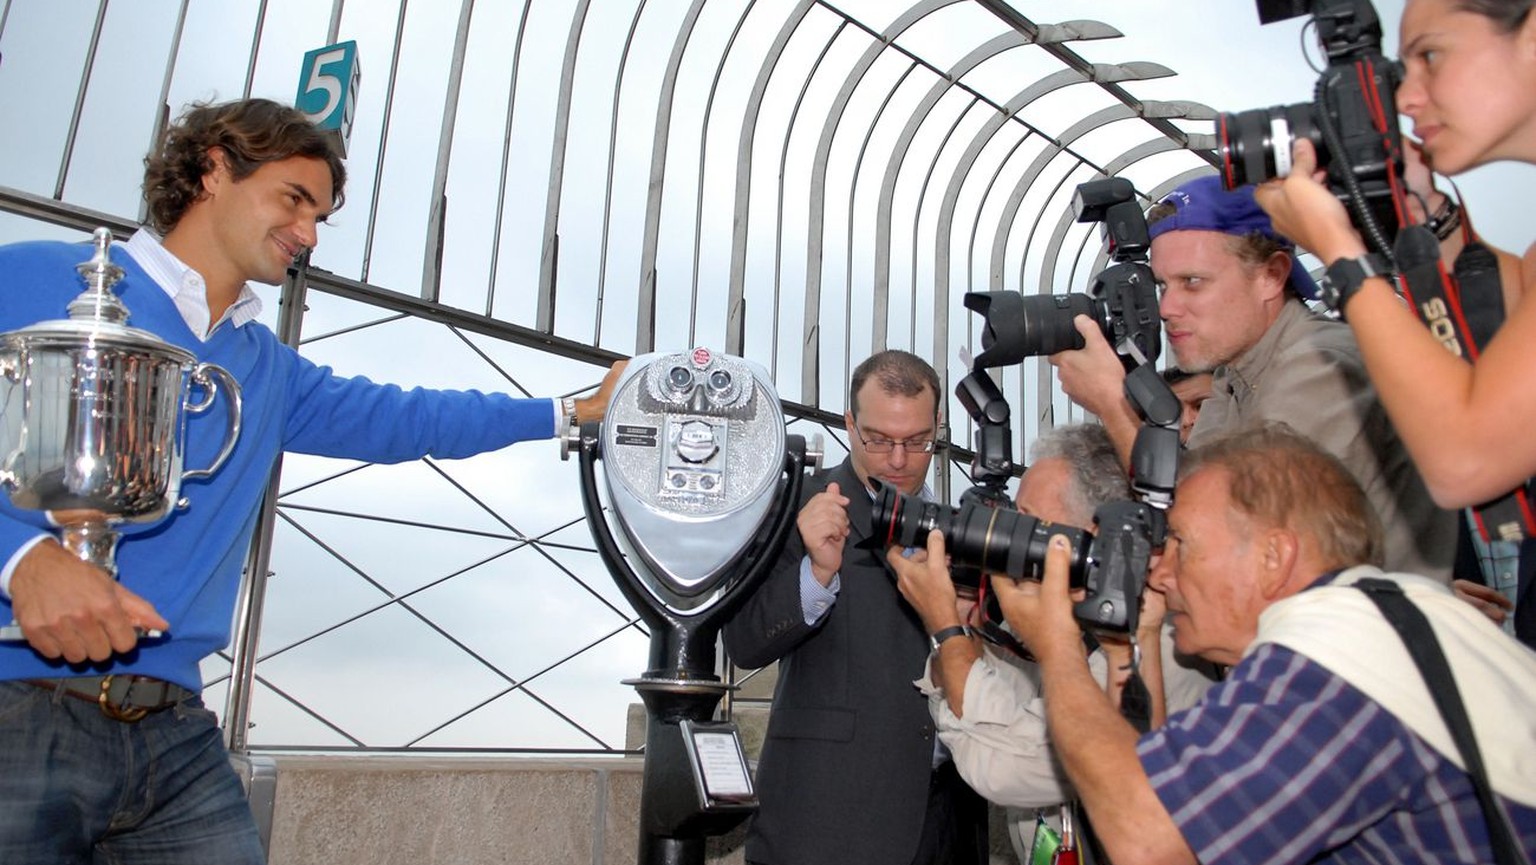 Swiss tennis player Roger Federer appears with his U.S. Open trophy during a photo op on the observation deck of the Empire State Building, Tuesday, Sept. 9, 2008 in New York. Federer won his fifth U. ...